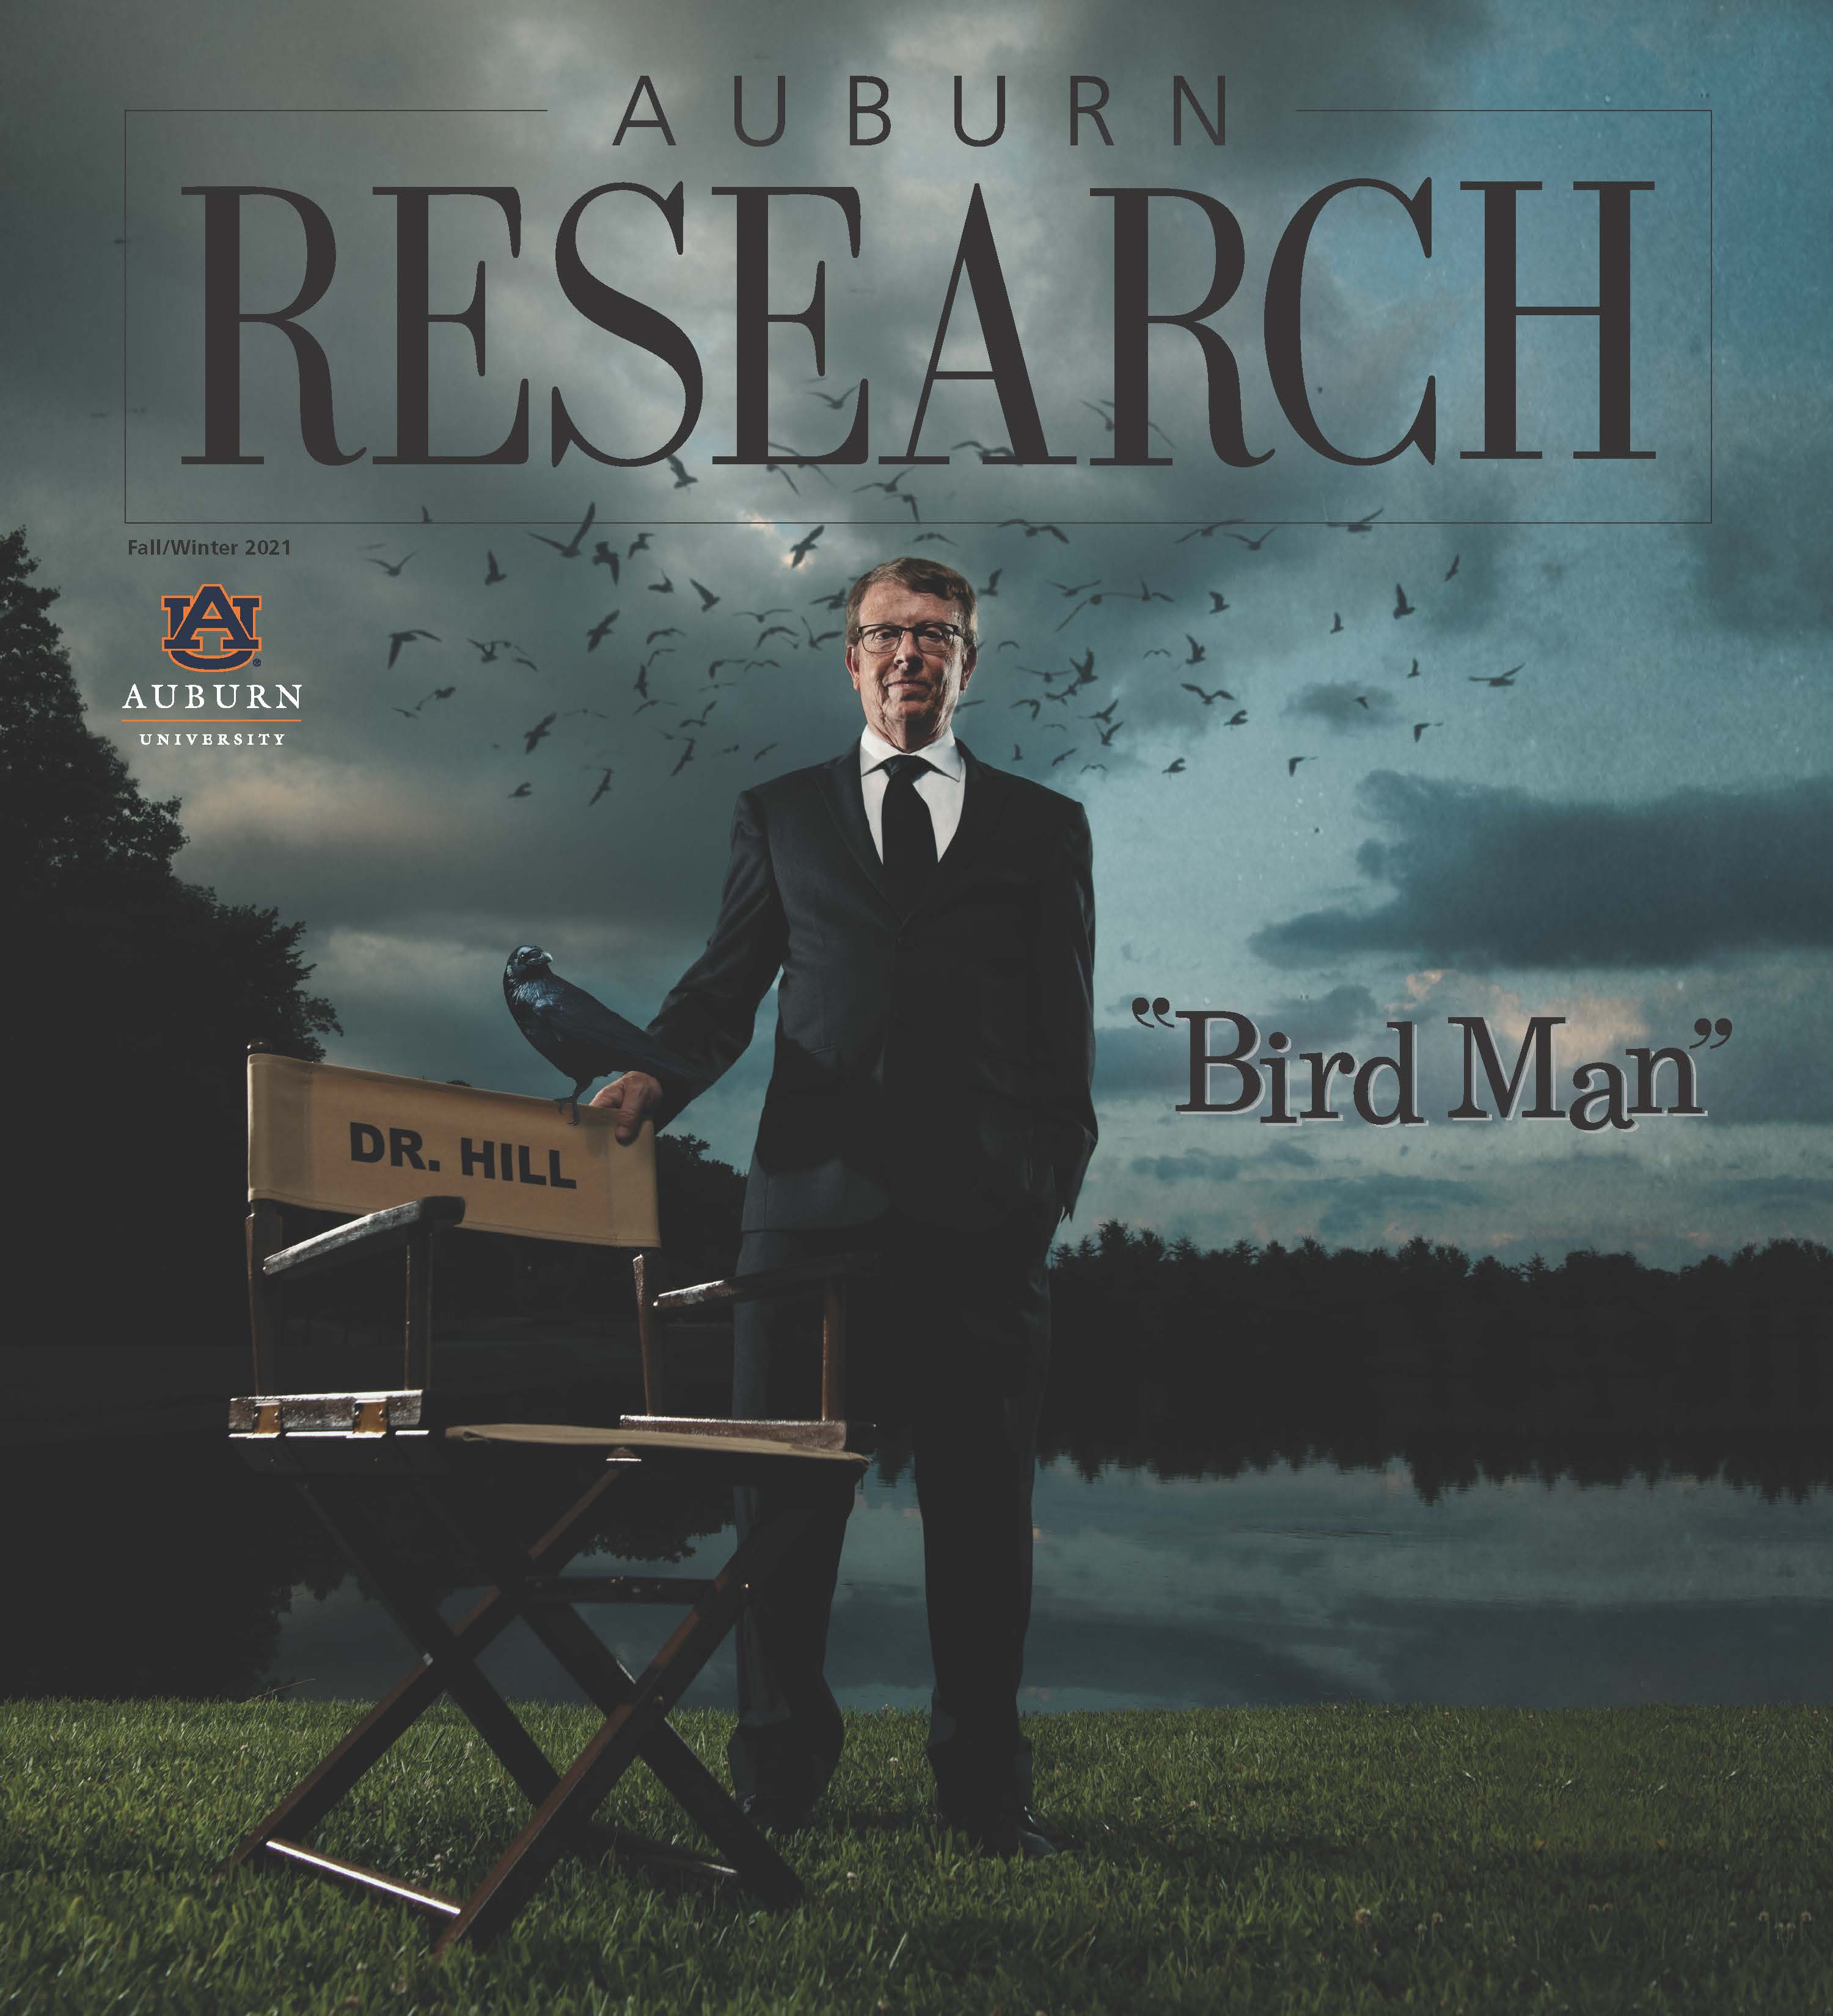 cover image of fall/winter 2021 Auburn Research magazine featuring Dr. Geoff Hill in suit and tie outdoors with director-style chair labeled "Dr. Hill" and multiple birds; text: "Bird Man" and Auburn University logo